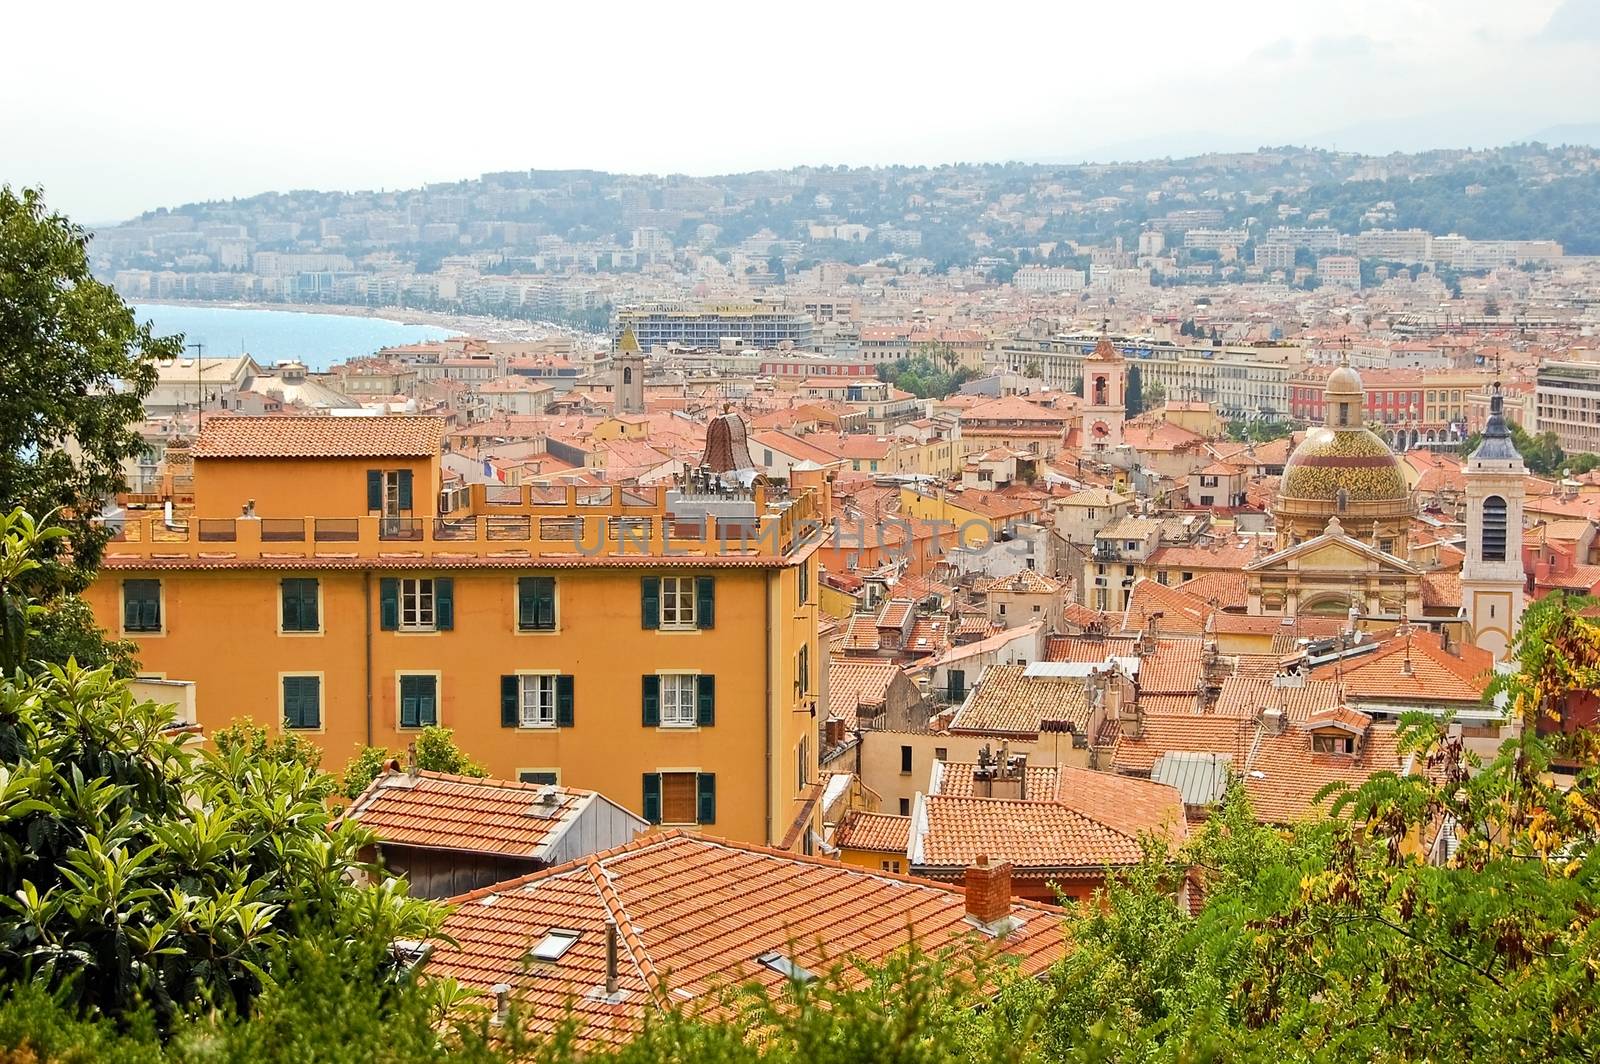 Cityscape of Nice in the french riviera.